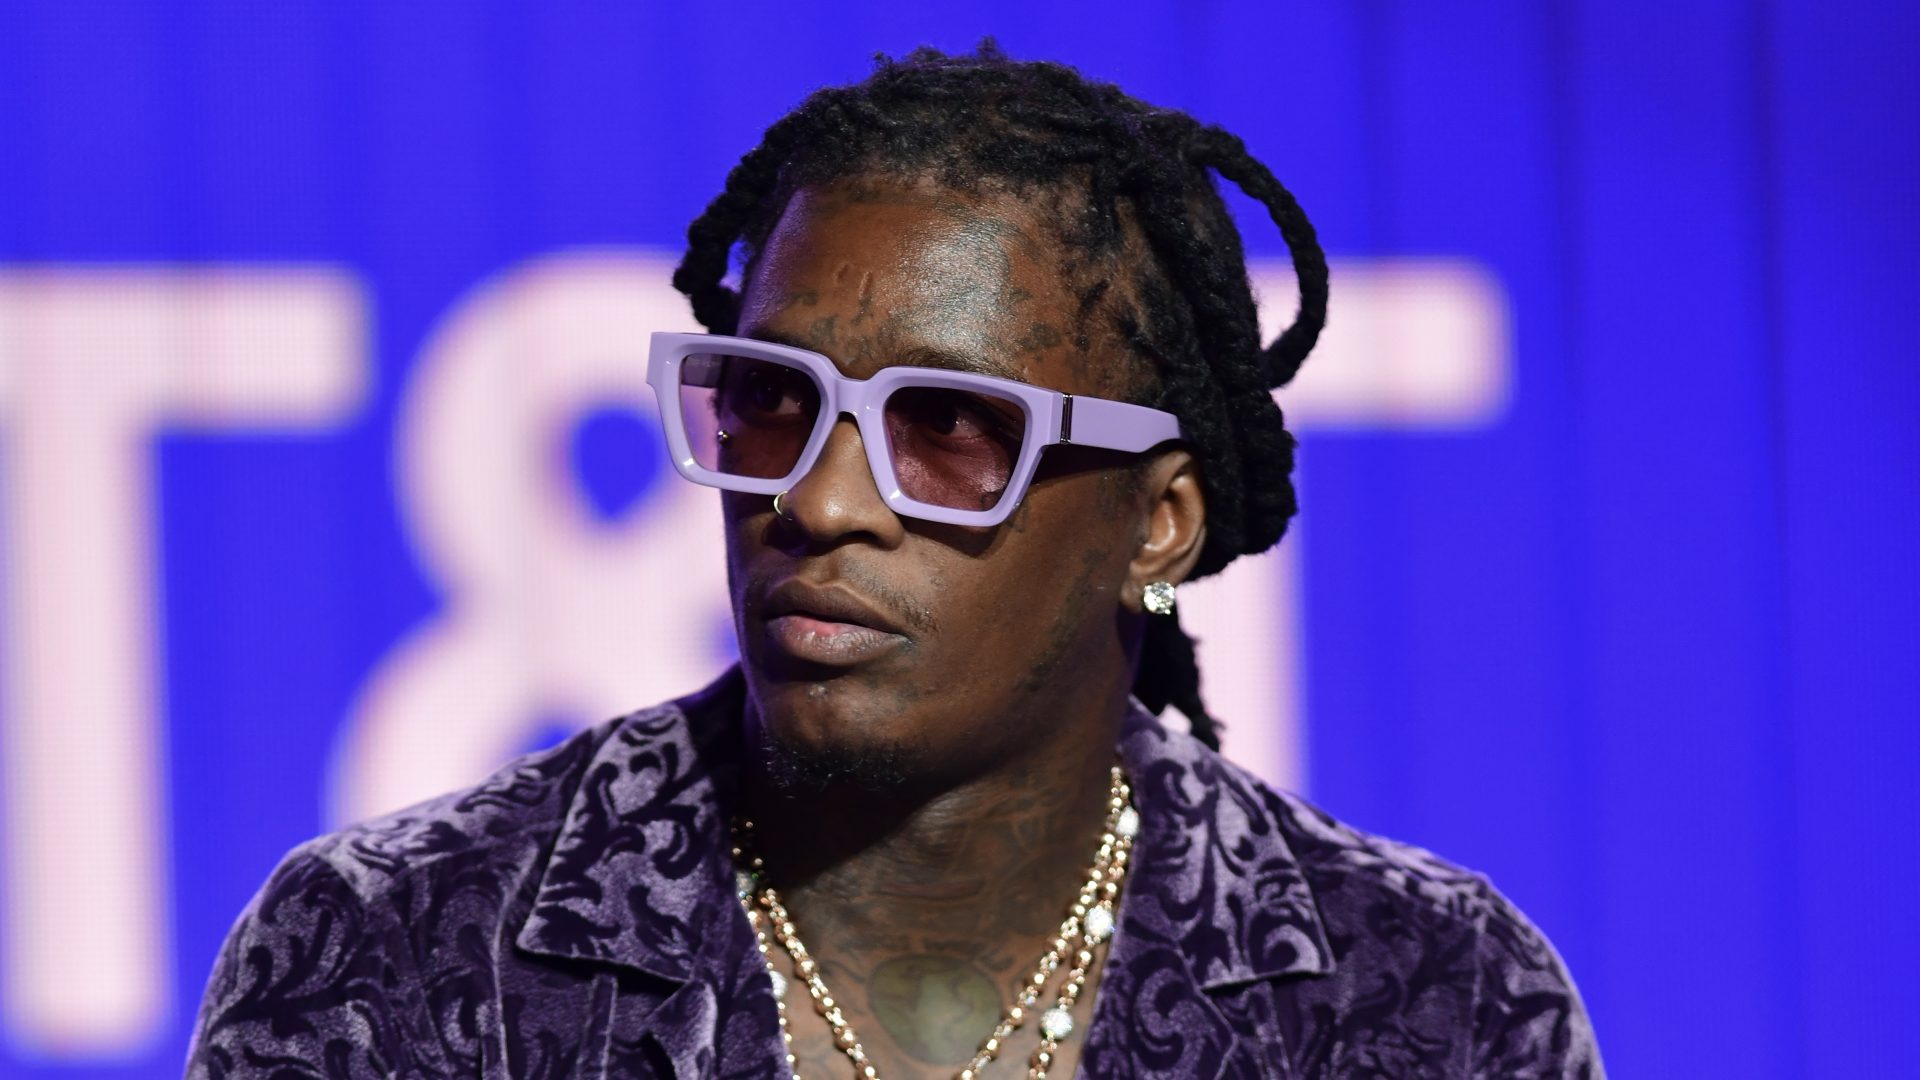 Oop! Young Thug's YSL RICO Case Sparks Renewed Talk Of Mistrial After Livestream Exposes Jurors' Faces On Day 3